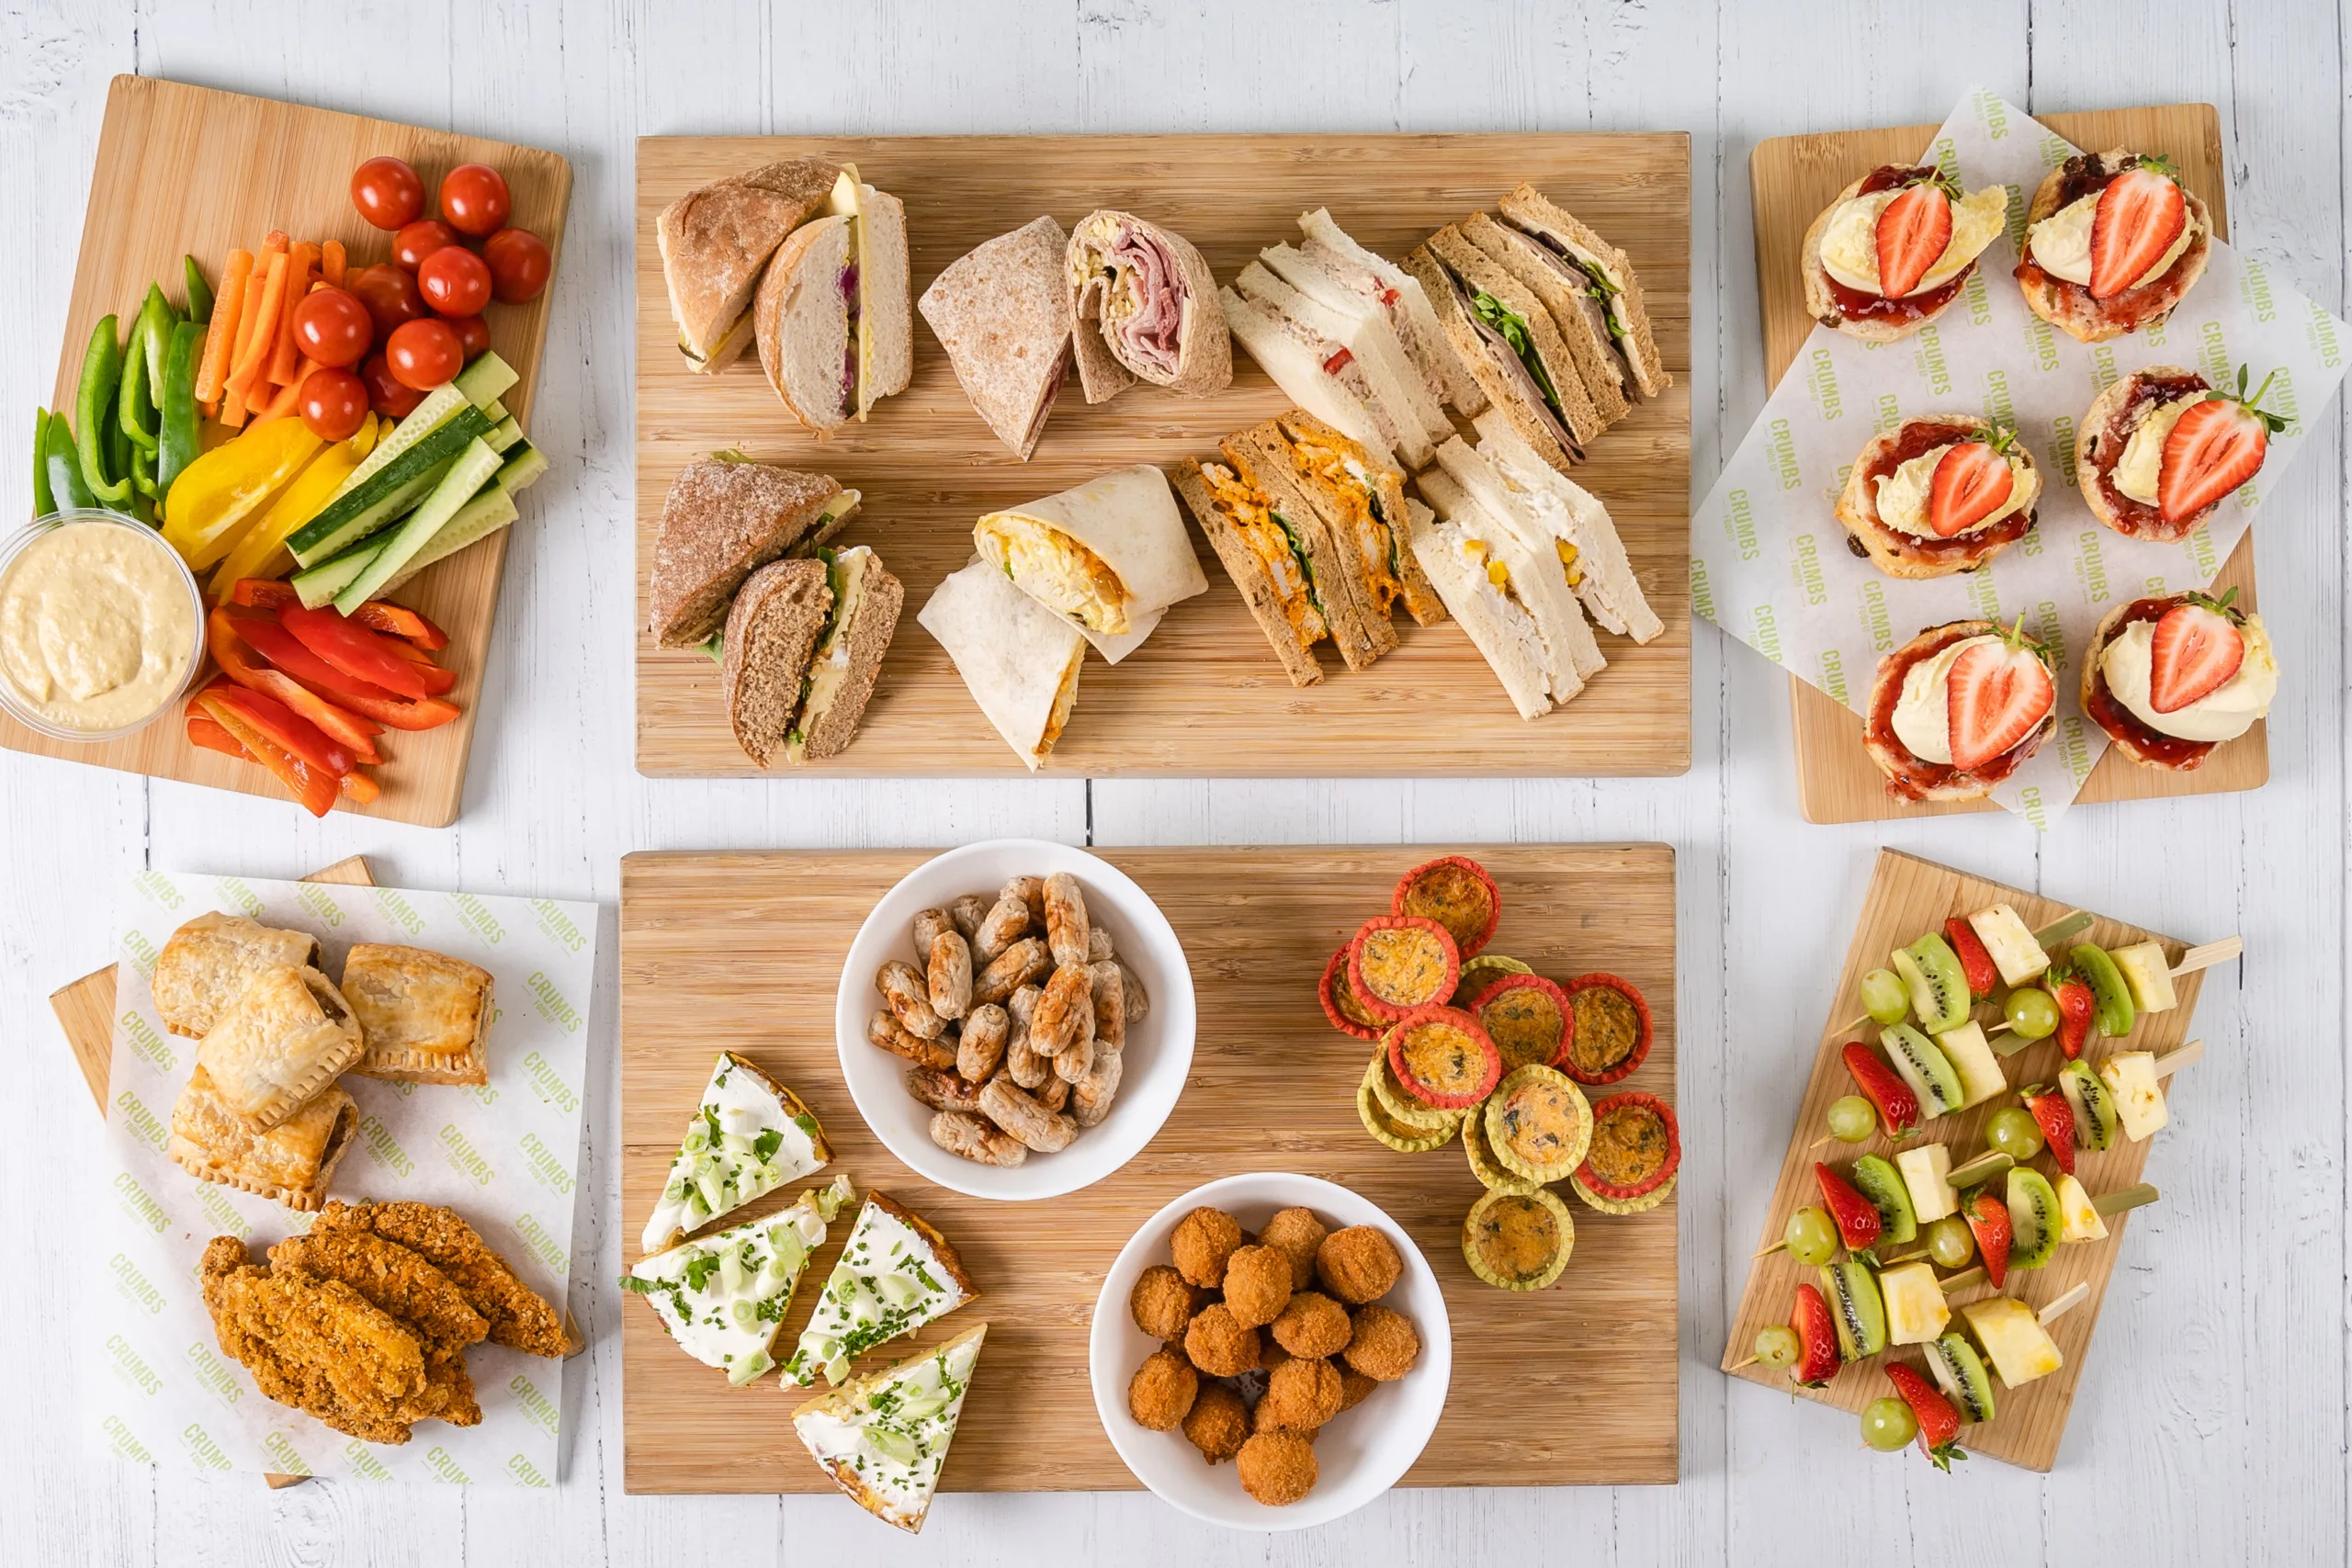 Selection of the finger food available from Crumbs Food Co